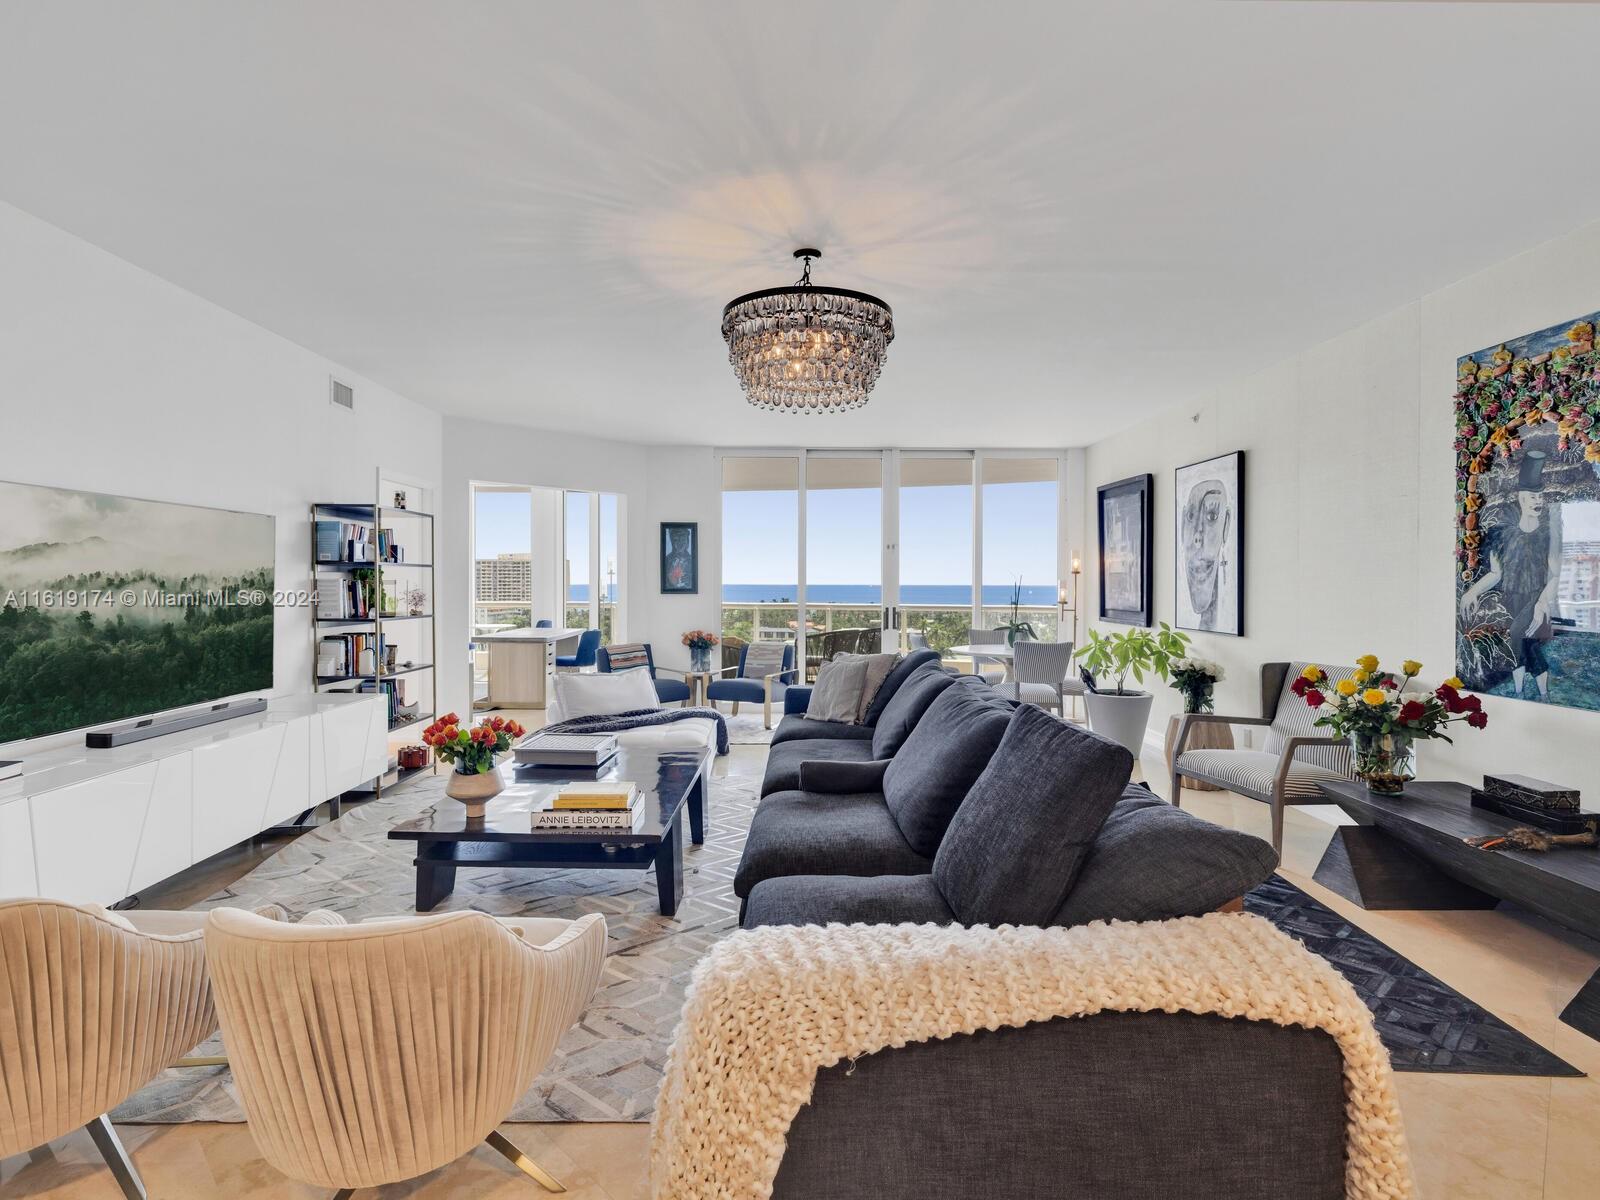 Introducing unit 1105 at Atlantic I! This stunning sought after corner residence is designed with floor-to-ceiling windows that flood the space with natural light & offers unobstructed panoramic views of the ocean, intracoastal & city skyline. Your elevator opens directly into your unit & greets you into your own private foyer. Substantial upgrades throughout the home include marble countertops in the kitchen, induction oven, professionally installed exhaust, wood flooring in all bedrooms, primary bedroom features 2 walk-in-closets, 2 baths, professional water filtration system & more. The community is set within 36 acres of beautifully landscaped park area & offers an array of amenities, including 3 pools, tennis courts & 25,000 sf residents club & spa. 1 storage space included.